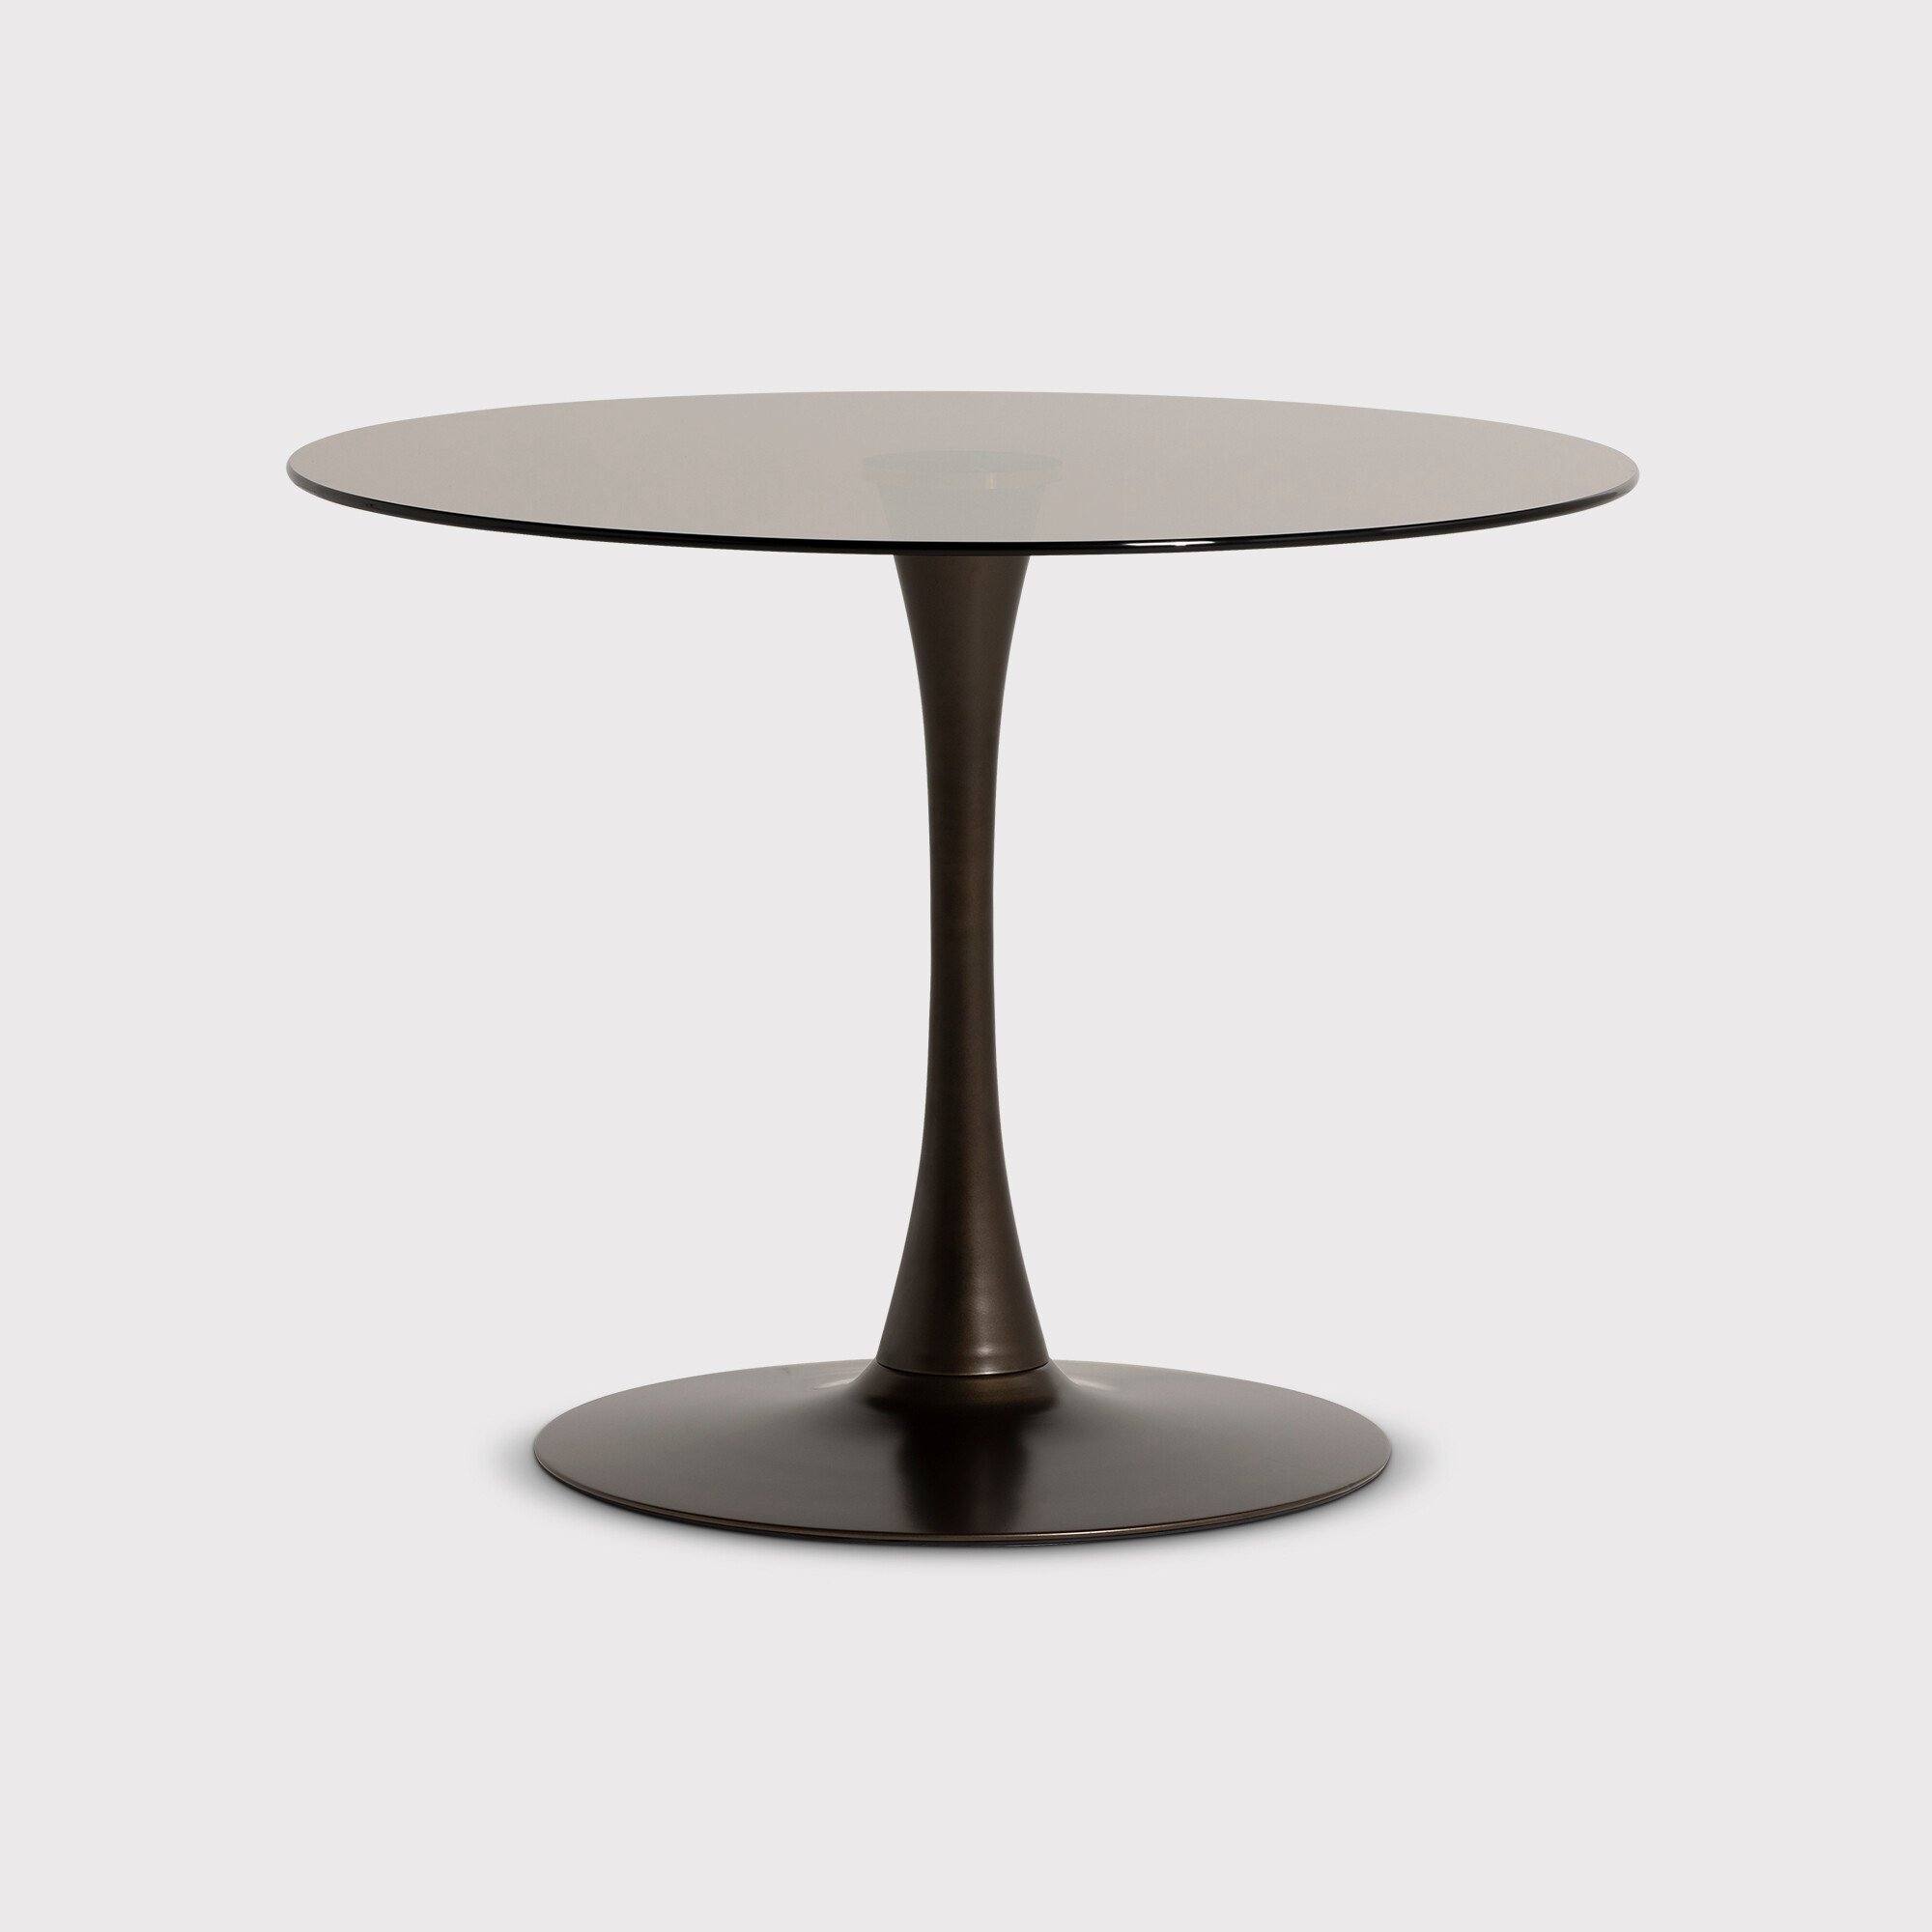 Rumi Round Dining Table 100cm, Round, Brown | Barker & Stonehouse